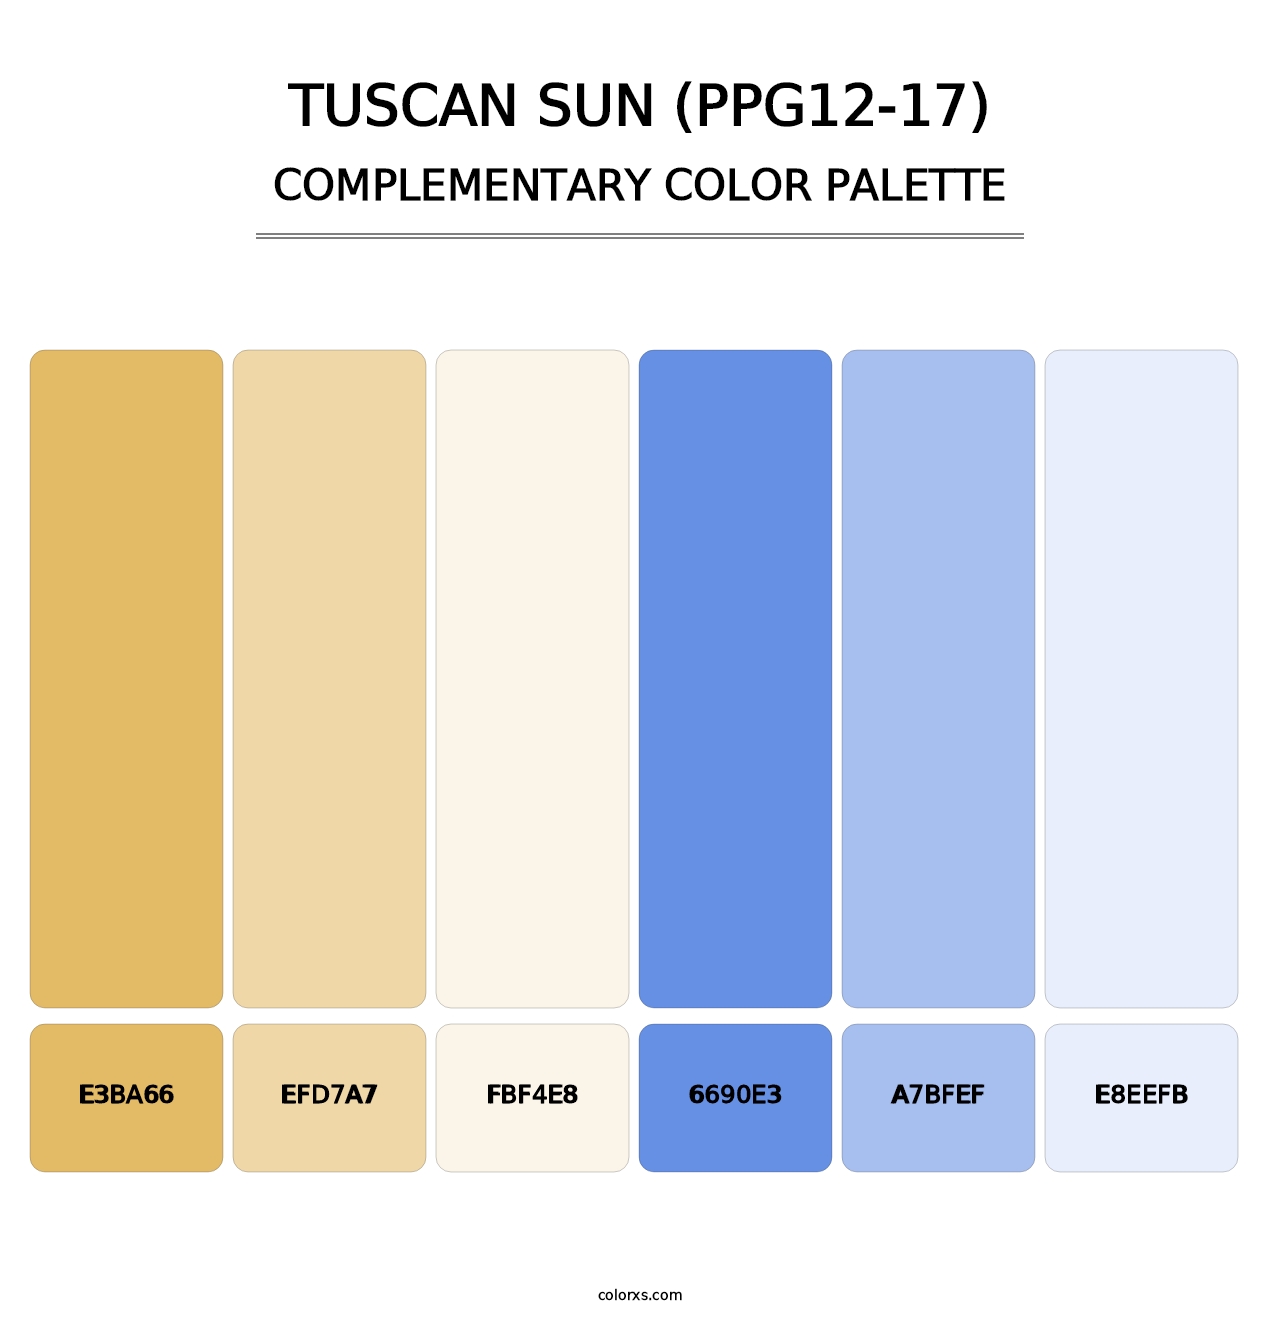 Tuscan Sun (PPG12-17) - Complementary Color Palette